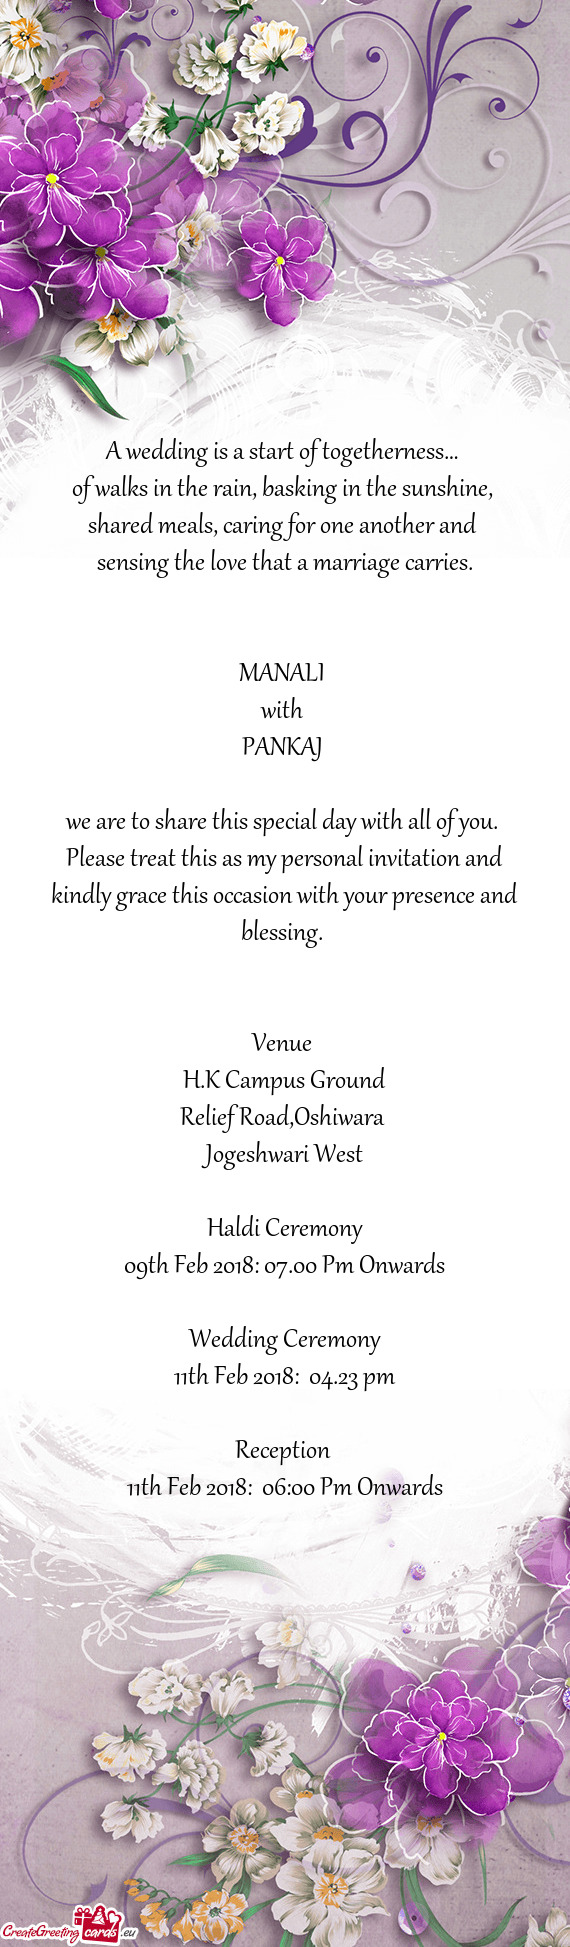 Please treat this as my personal invitation and kindly grace this occasion with your presence and